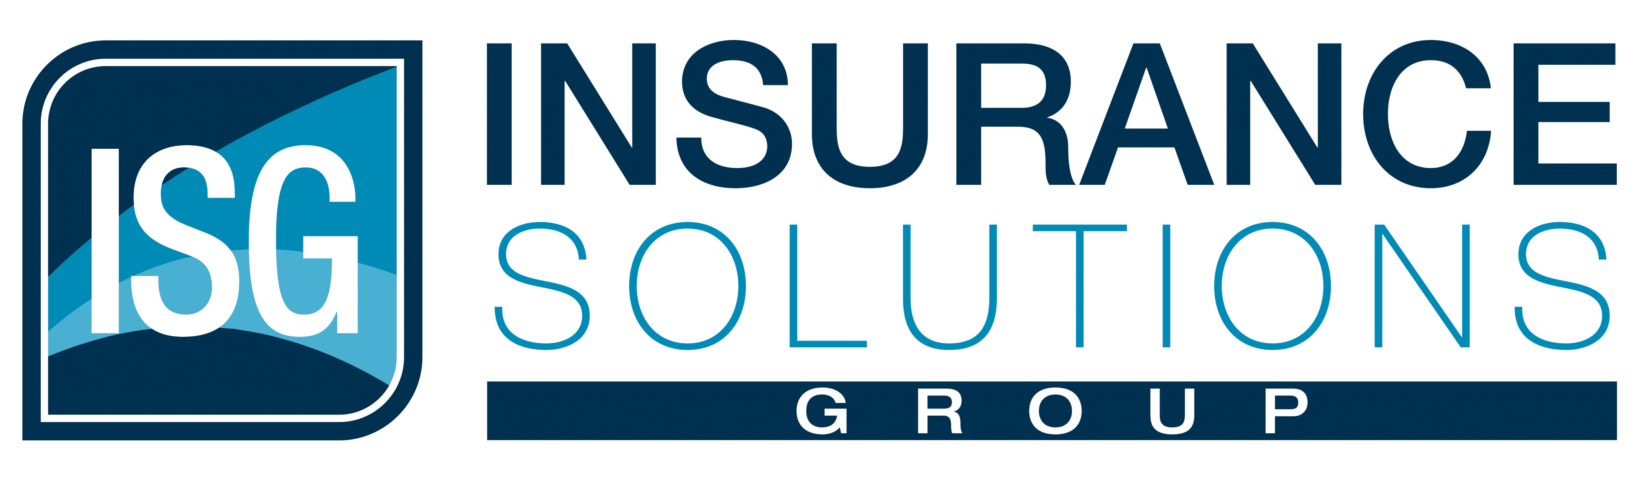 Insurance Solutions Group